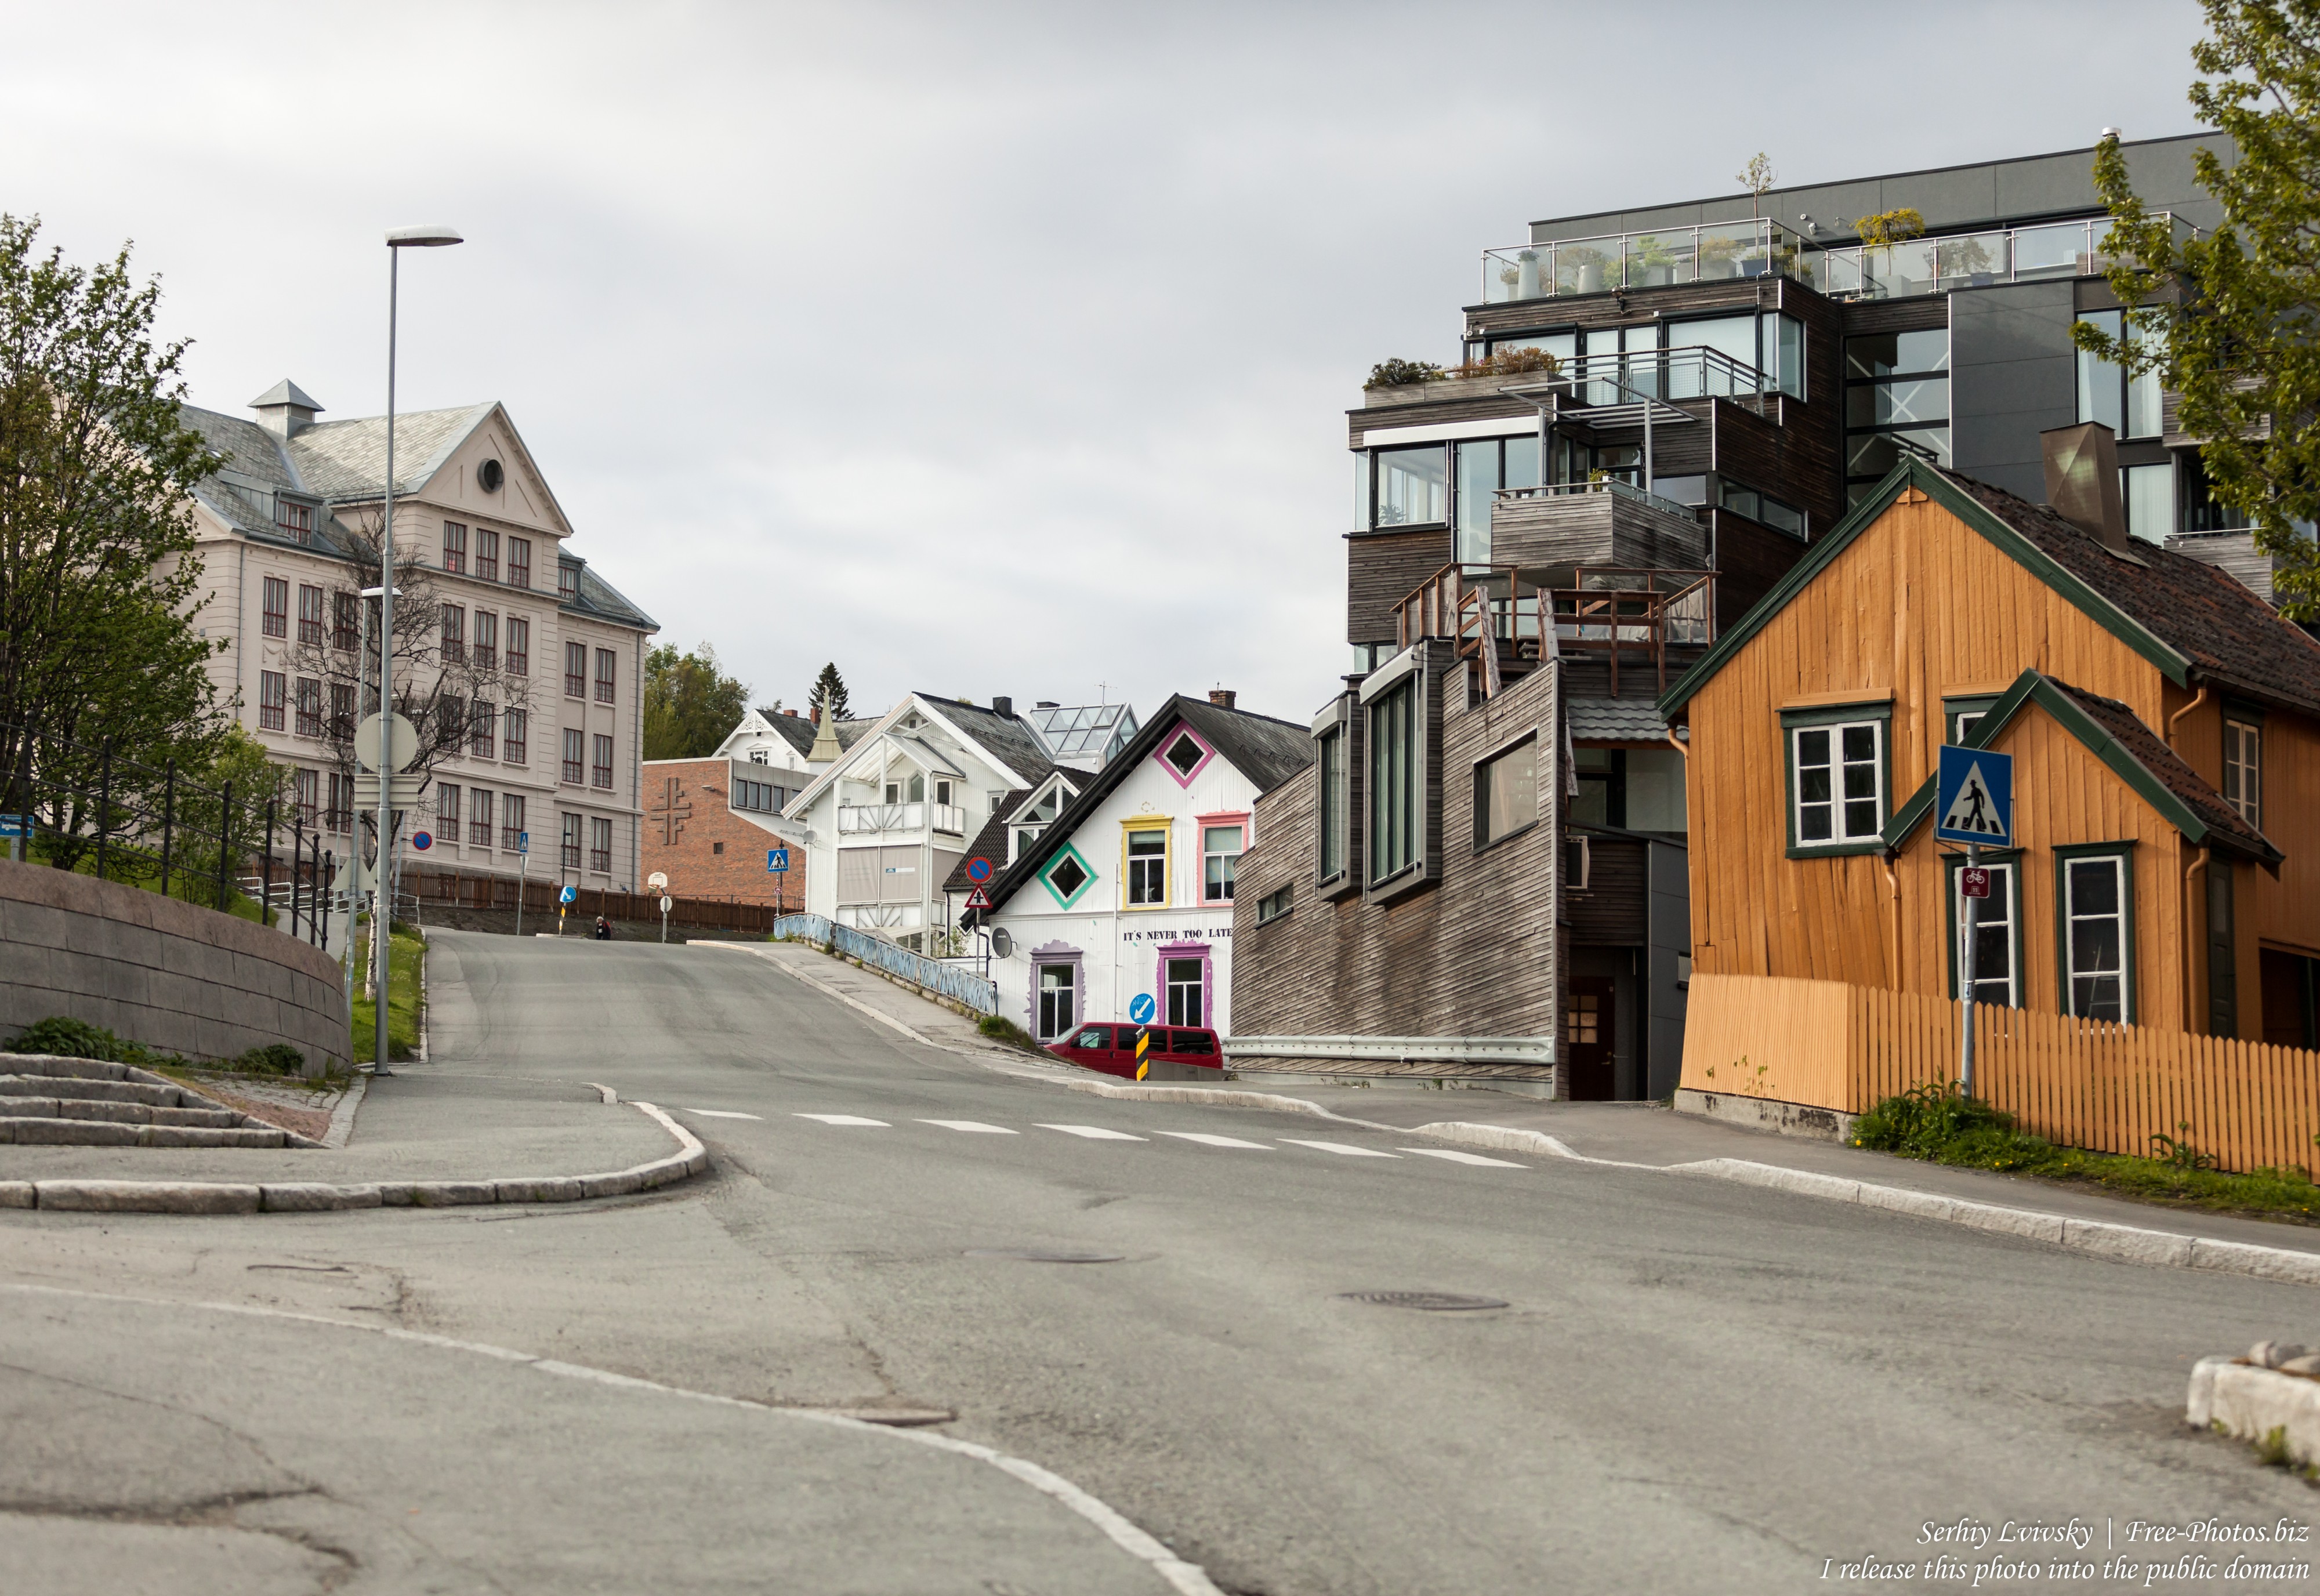 Tromso, Norway, photographed in June 2018 by Serhiy Lvivsky, picture 42